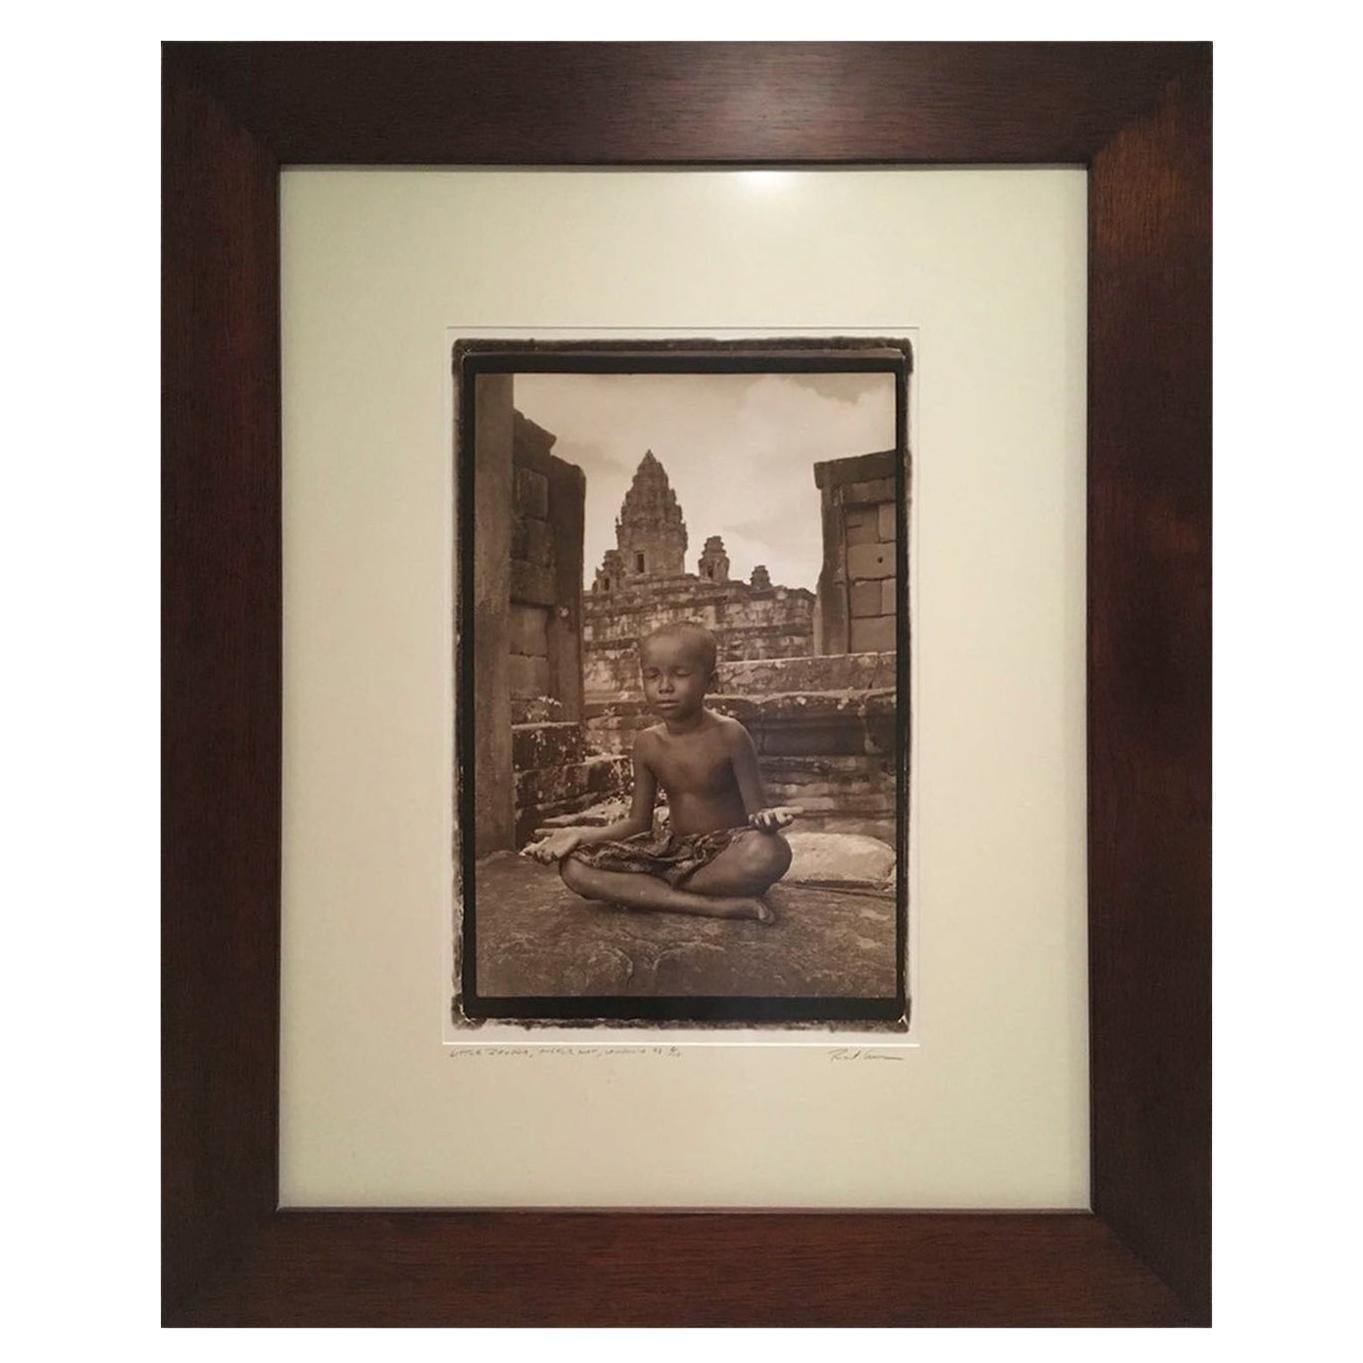 Framed Little Buddha sepia phothograh, Archival Pigment Print - Photograph by Robert Curran